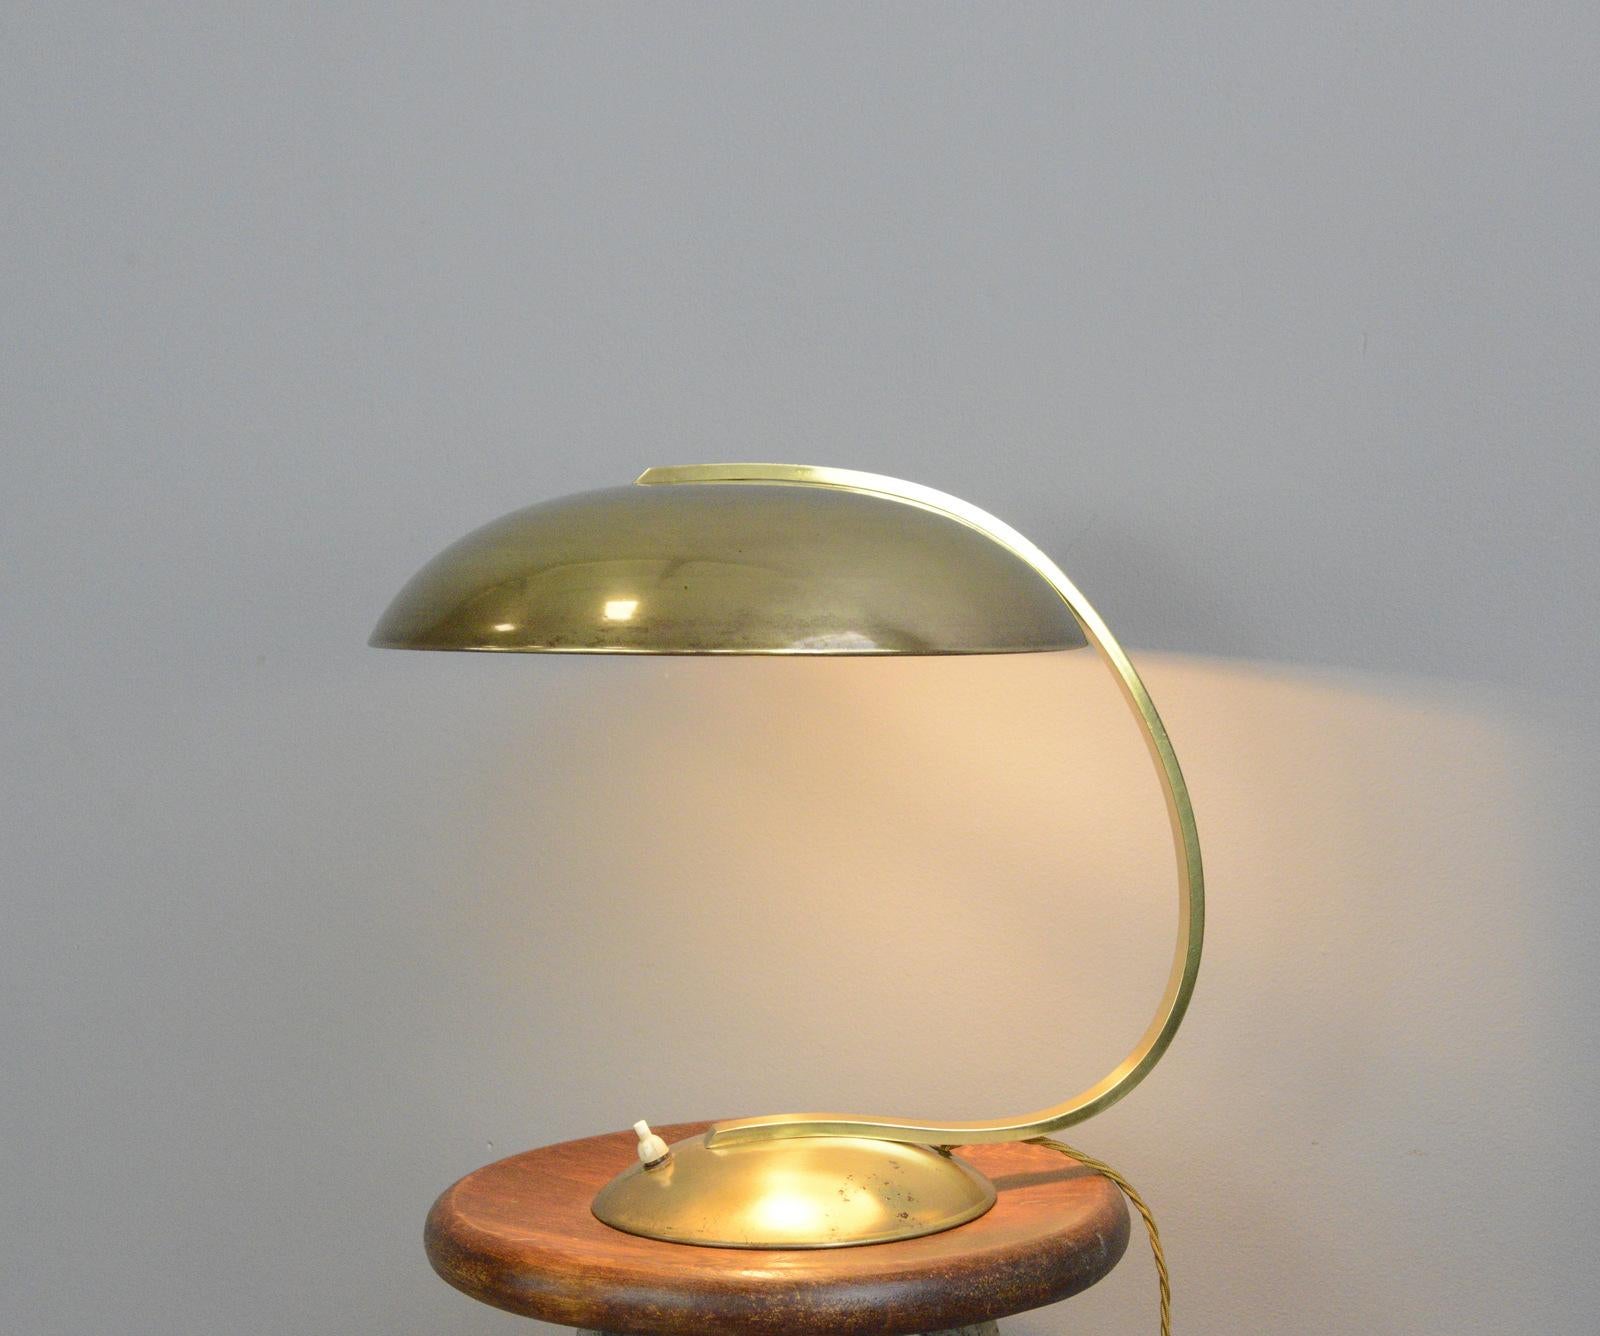 Bauhaus brass table lamp by Hillebrand circa 1930s

- Fully brass
- Takes E27 fitting bulbs
- On/Off switch on the base
- Made by Hillebrand 
- German ~ 1930s
- Measures: 36cm tall x 36cm wide x 40cm deep.

Hillebrand

Hillebrand Leuchten